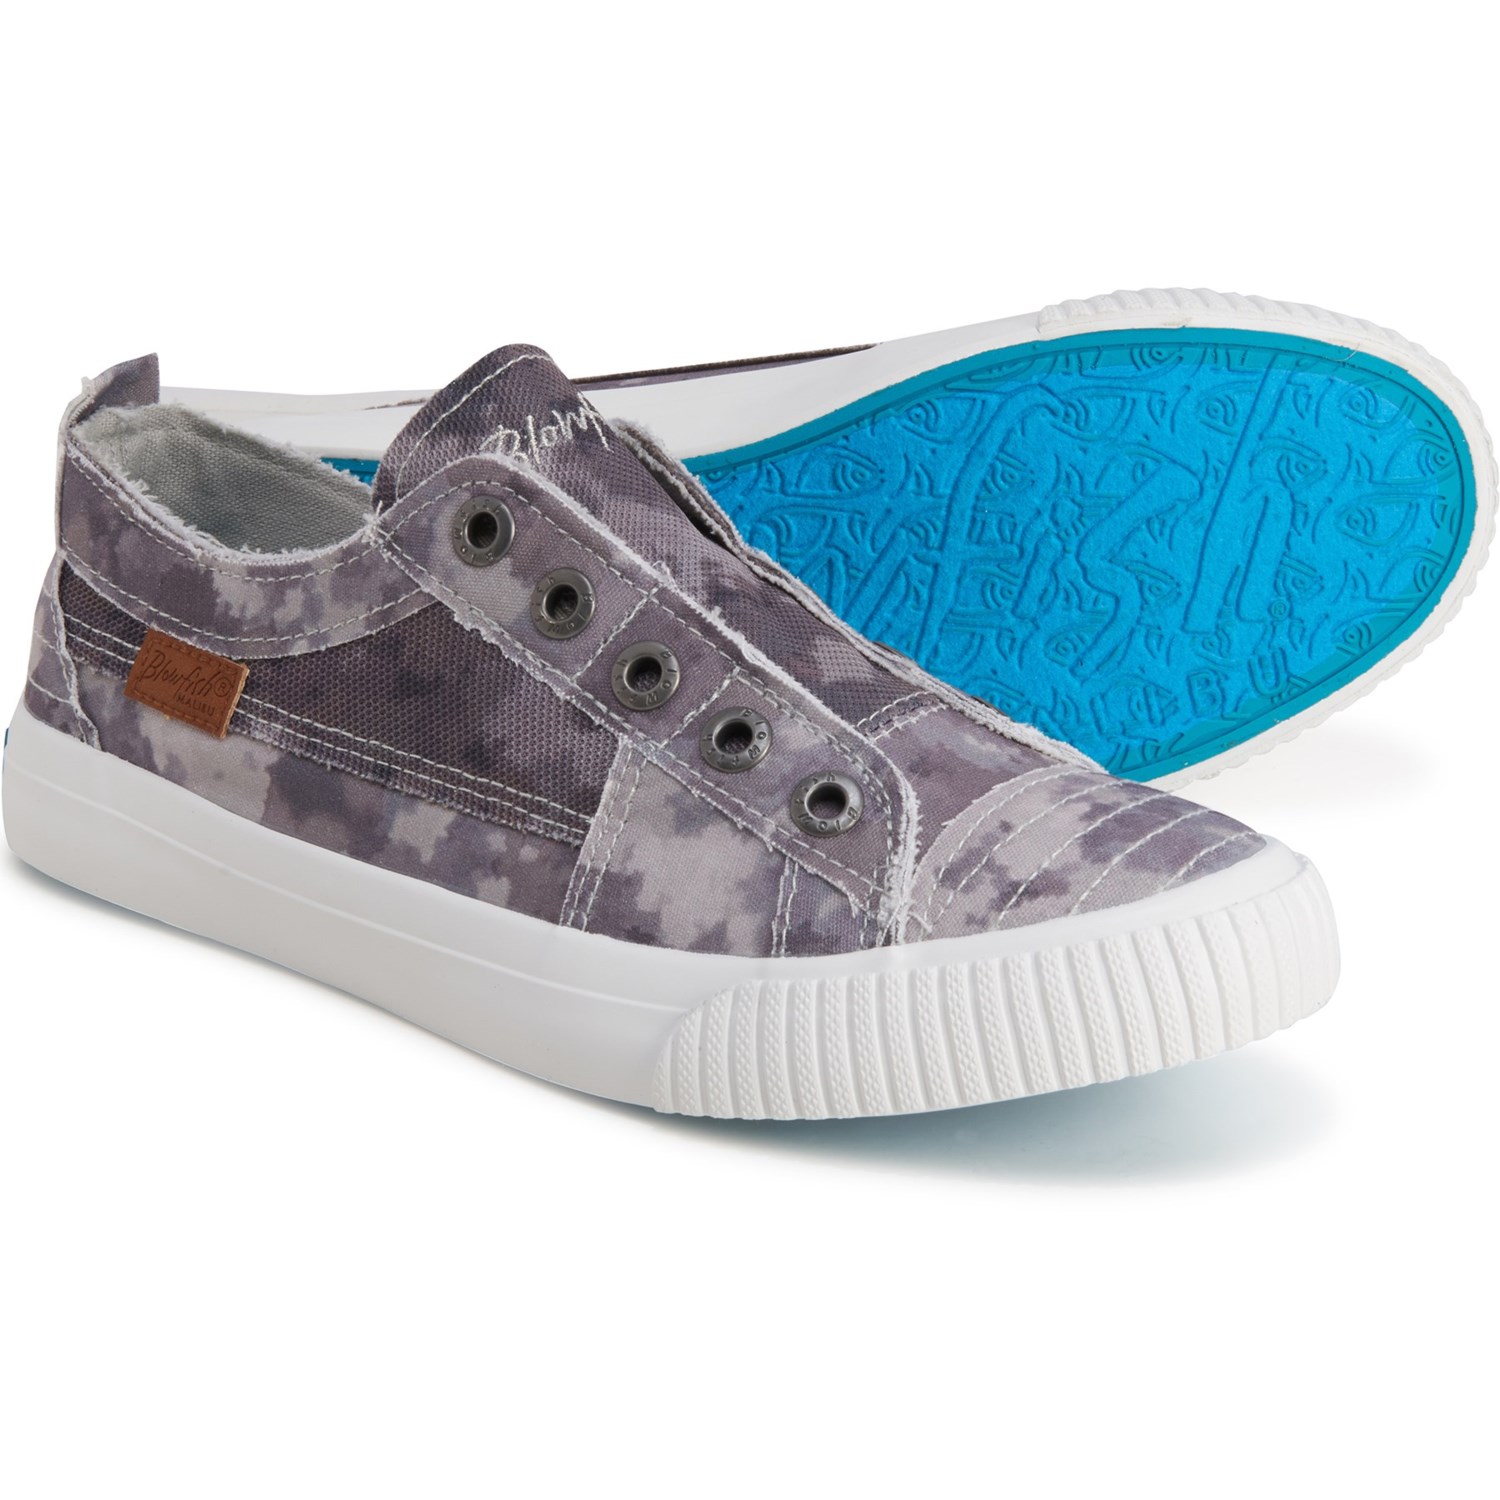 Blowfish Buzz Canvas Sneakers (For Women) - Save 33%